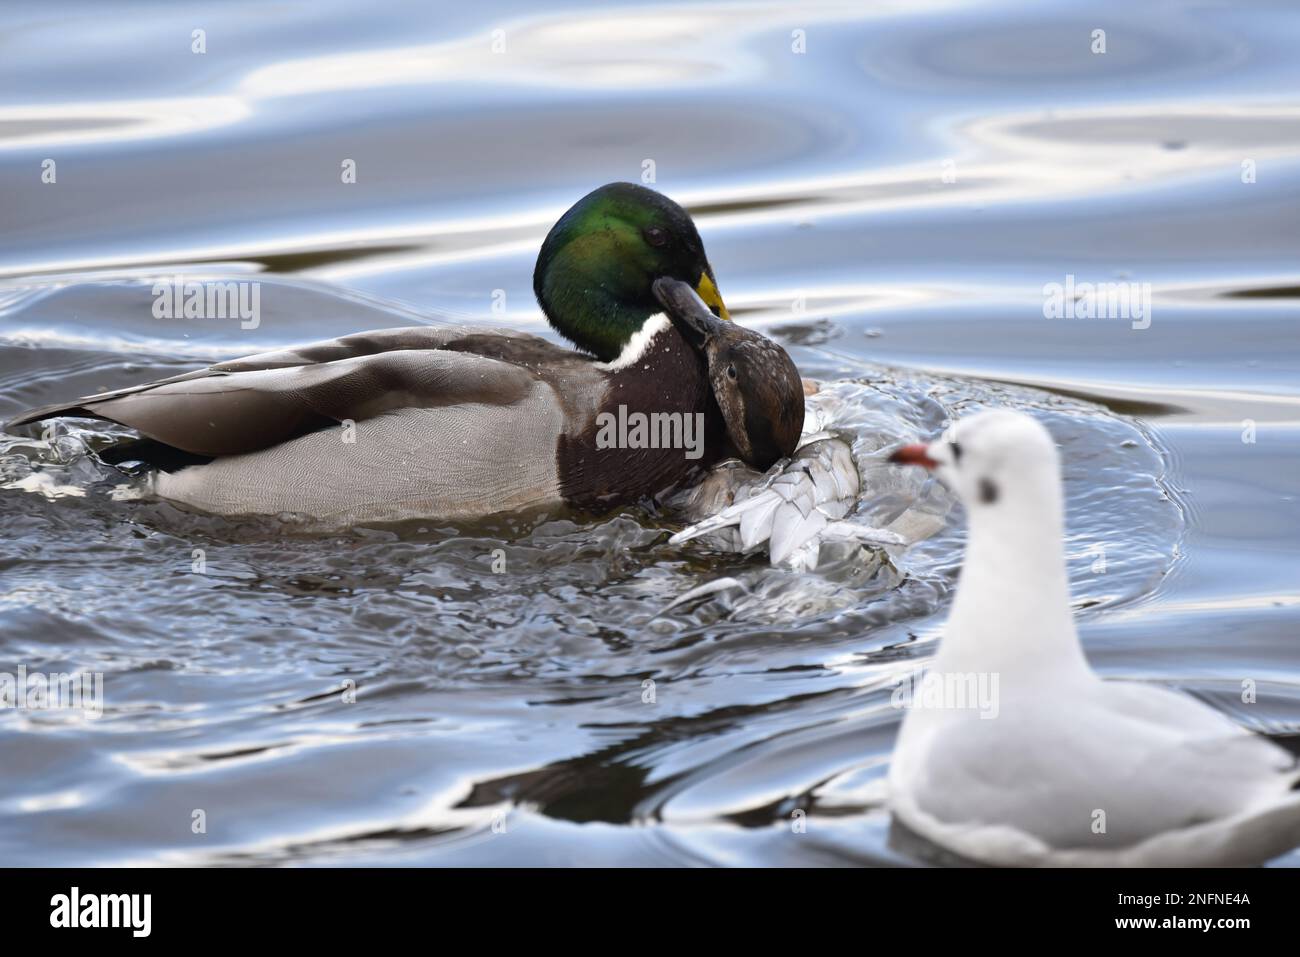 Mating Behaviour Between Drake Mallard and Northern Pintail x Gadwall Hybrid Duck with Black-headed Gull Onlooking on Blue Soft Wavy Lake Water in UK Stock Photo